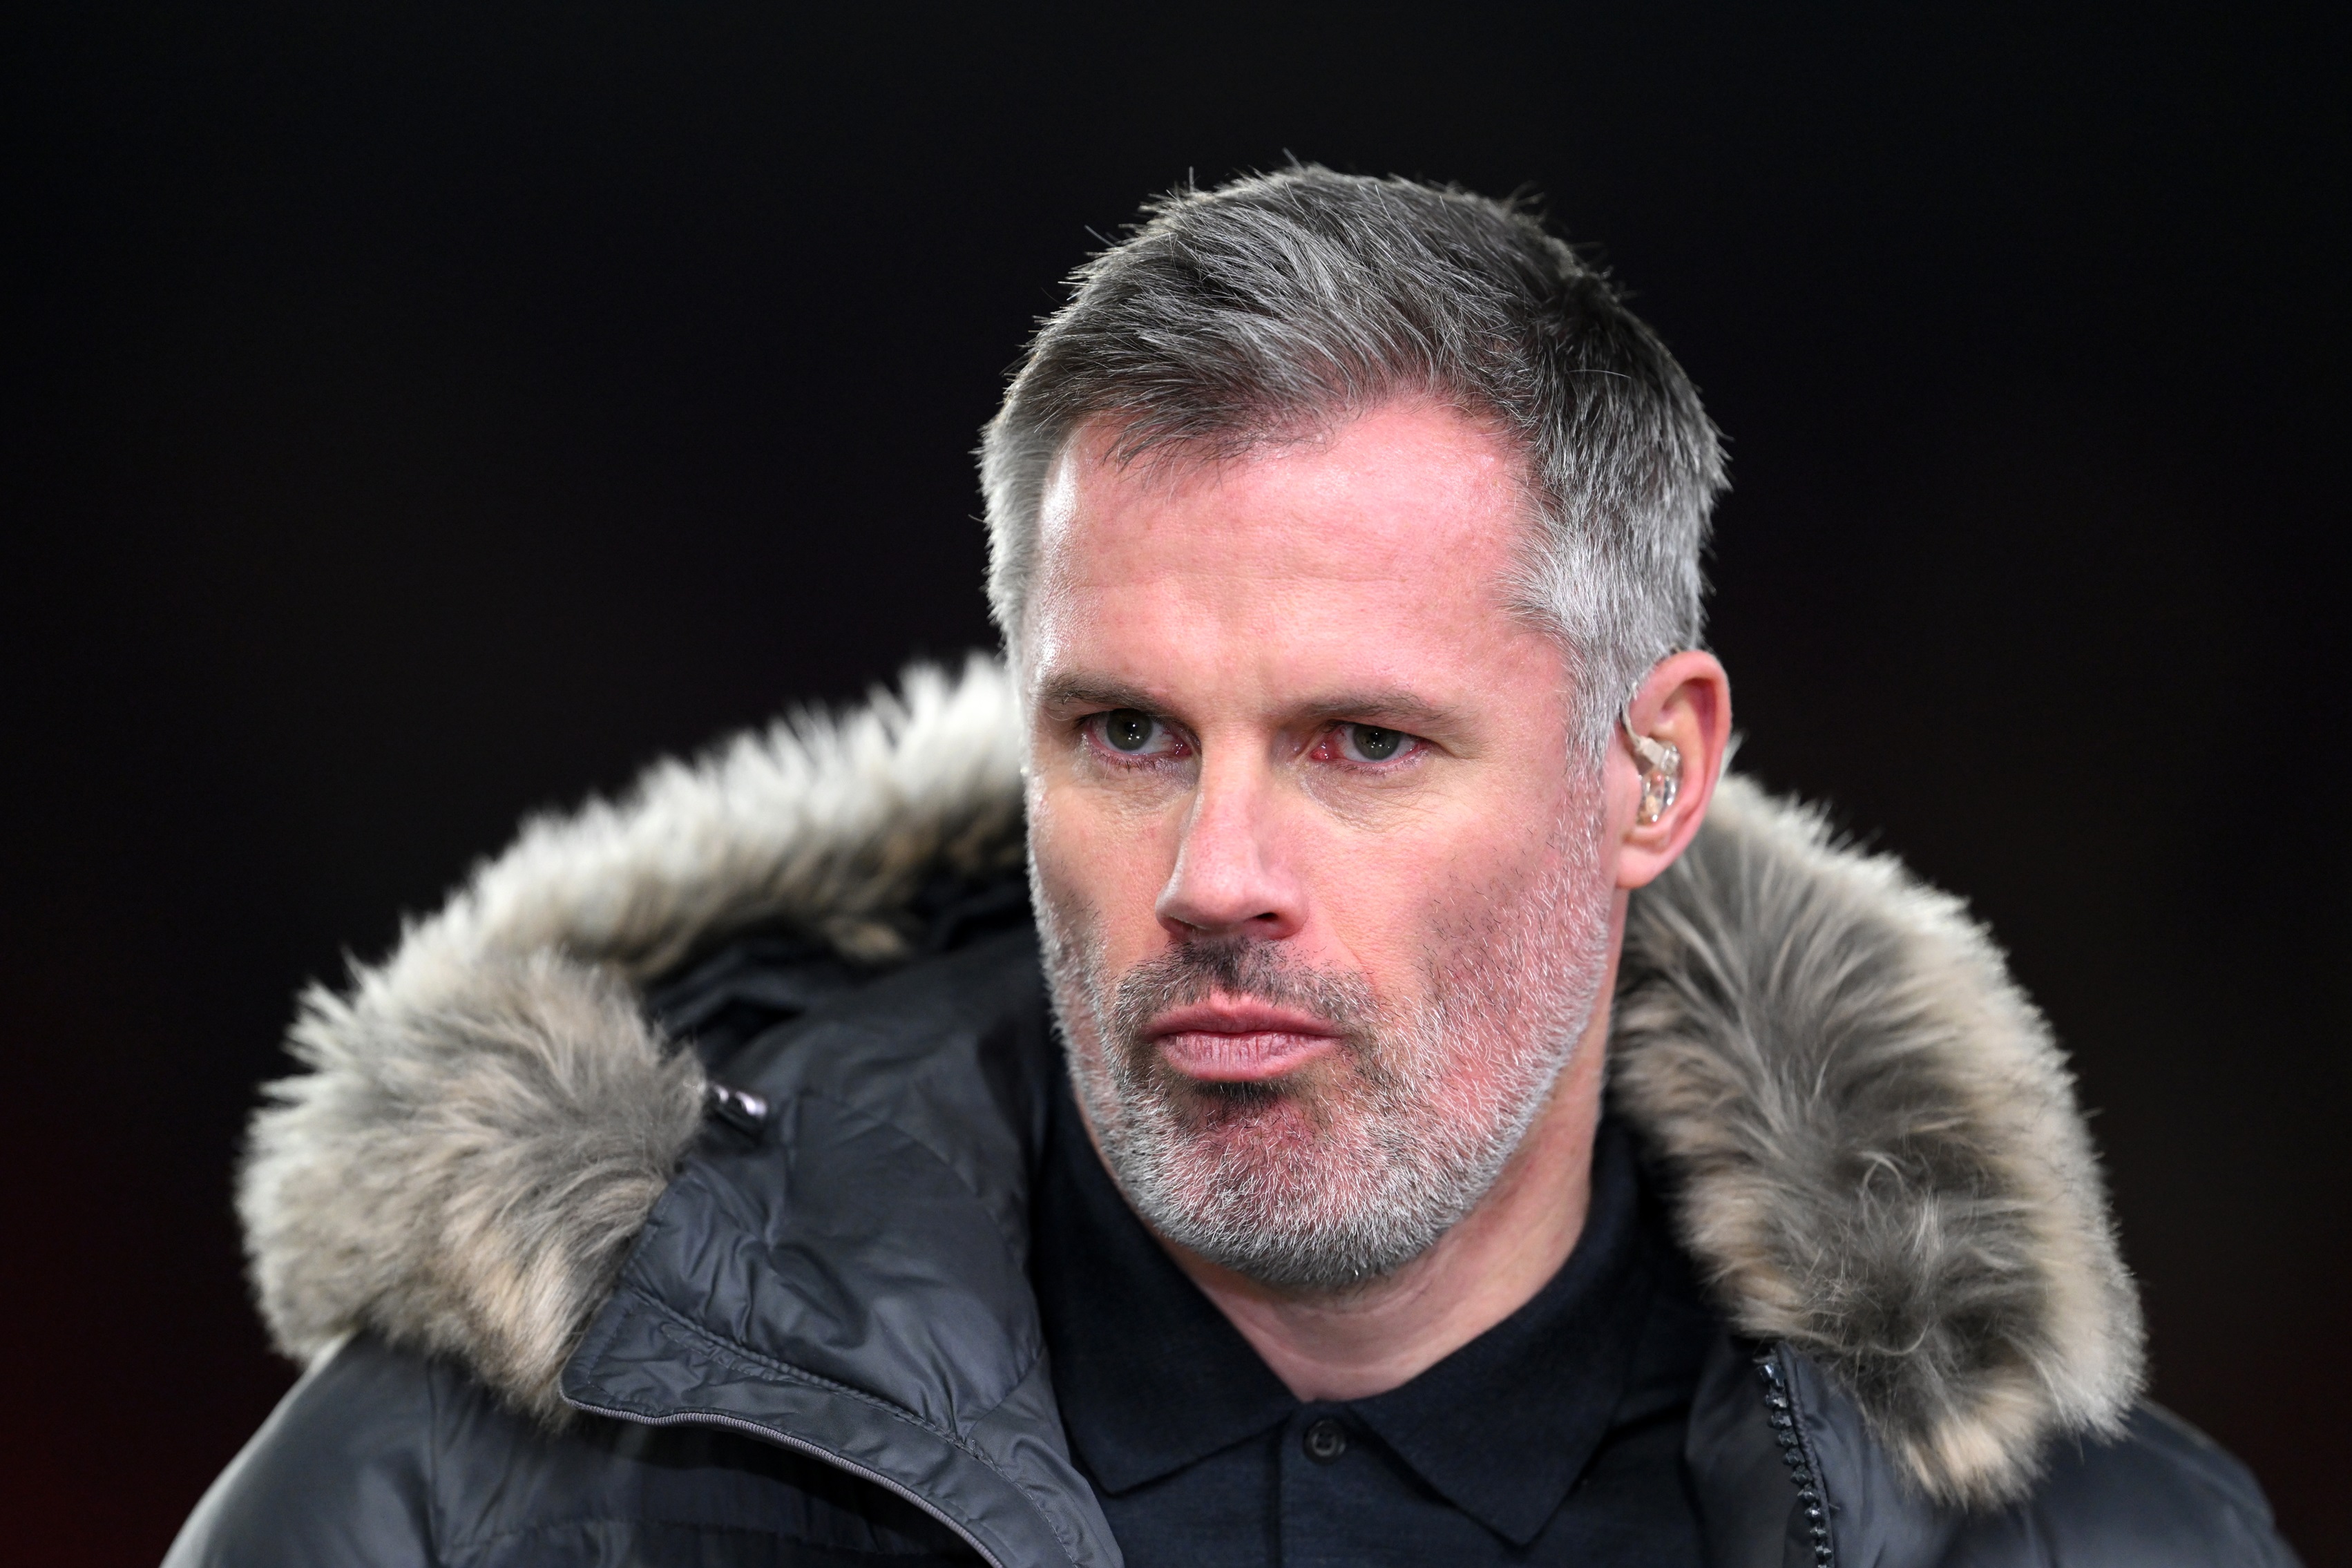 ‘Lucky boy’ – Carragher believes Bournemouth man was fortunate to stay on the field against Liverpool